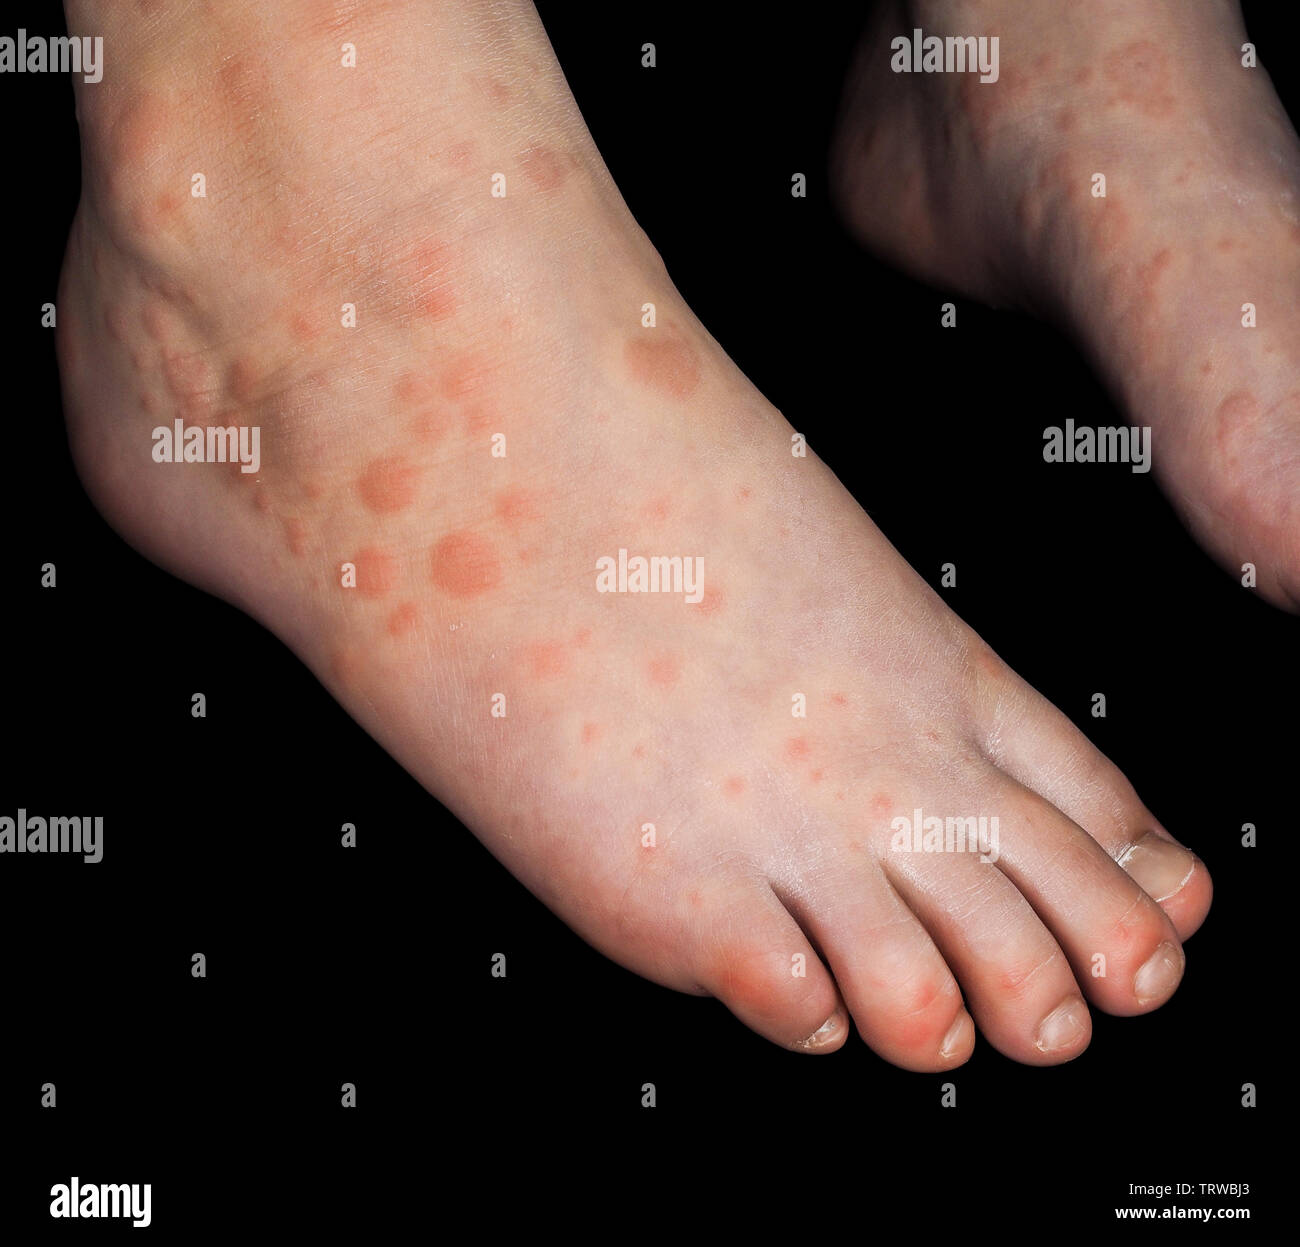 Child with red rash from Coxsackievirus, on both feet, isolated on black Stock Photo